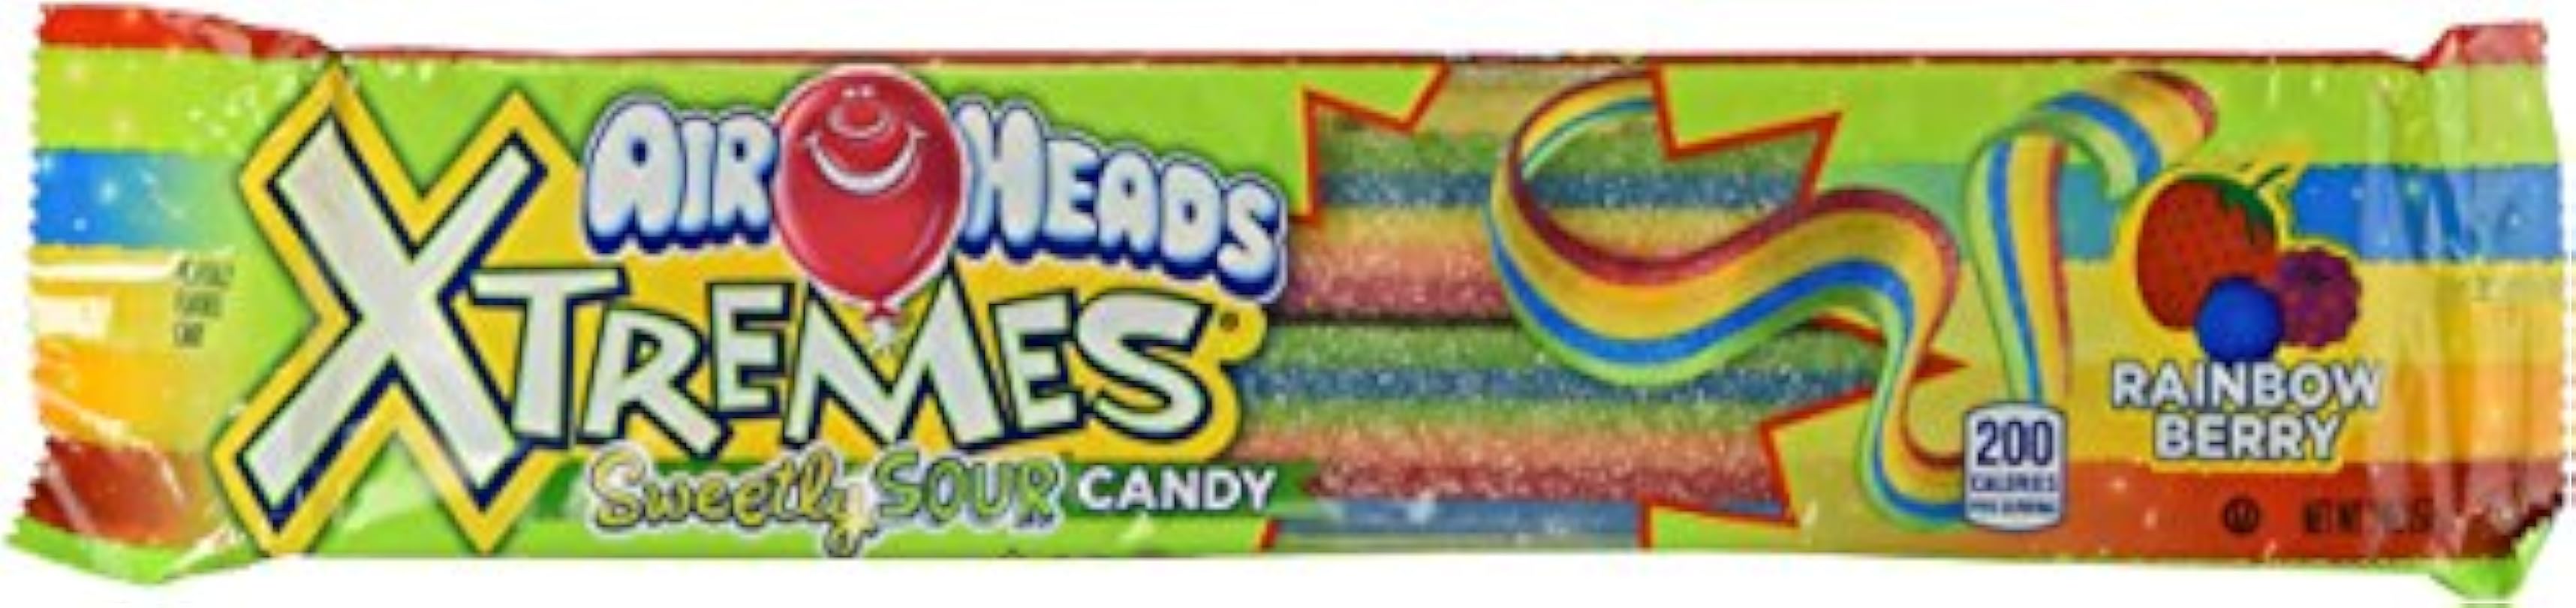 Airheads Extremes Sour Candy, Rainbow Berry, 2 Ounce (Pack of 4 Individual Packages) 705434219